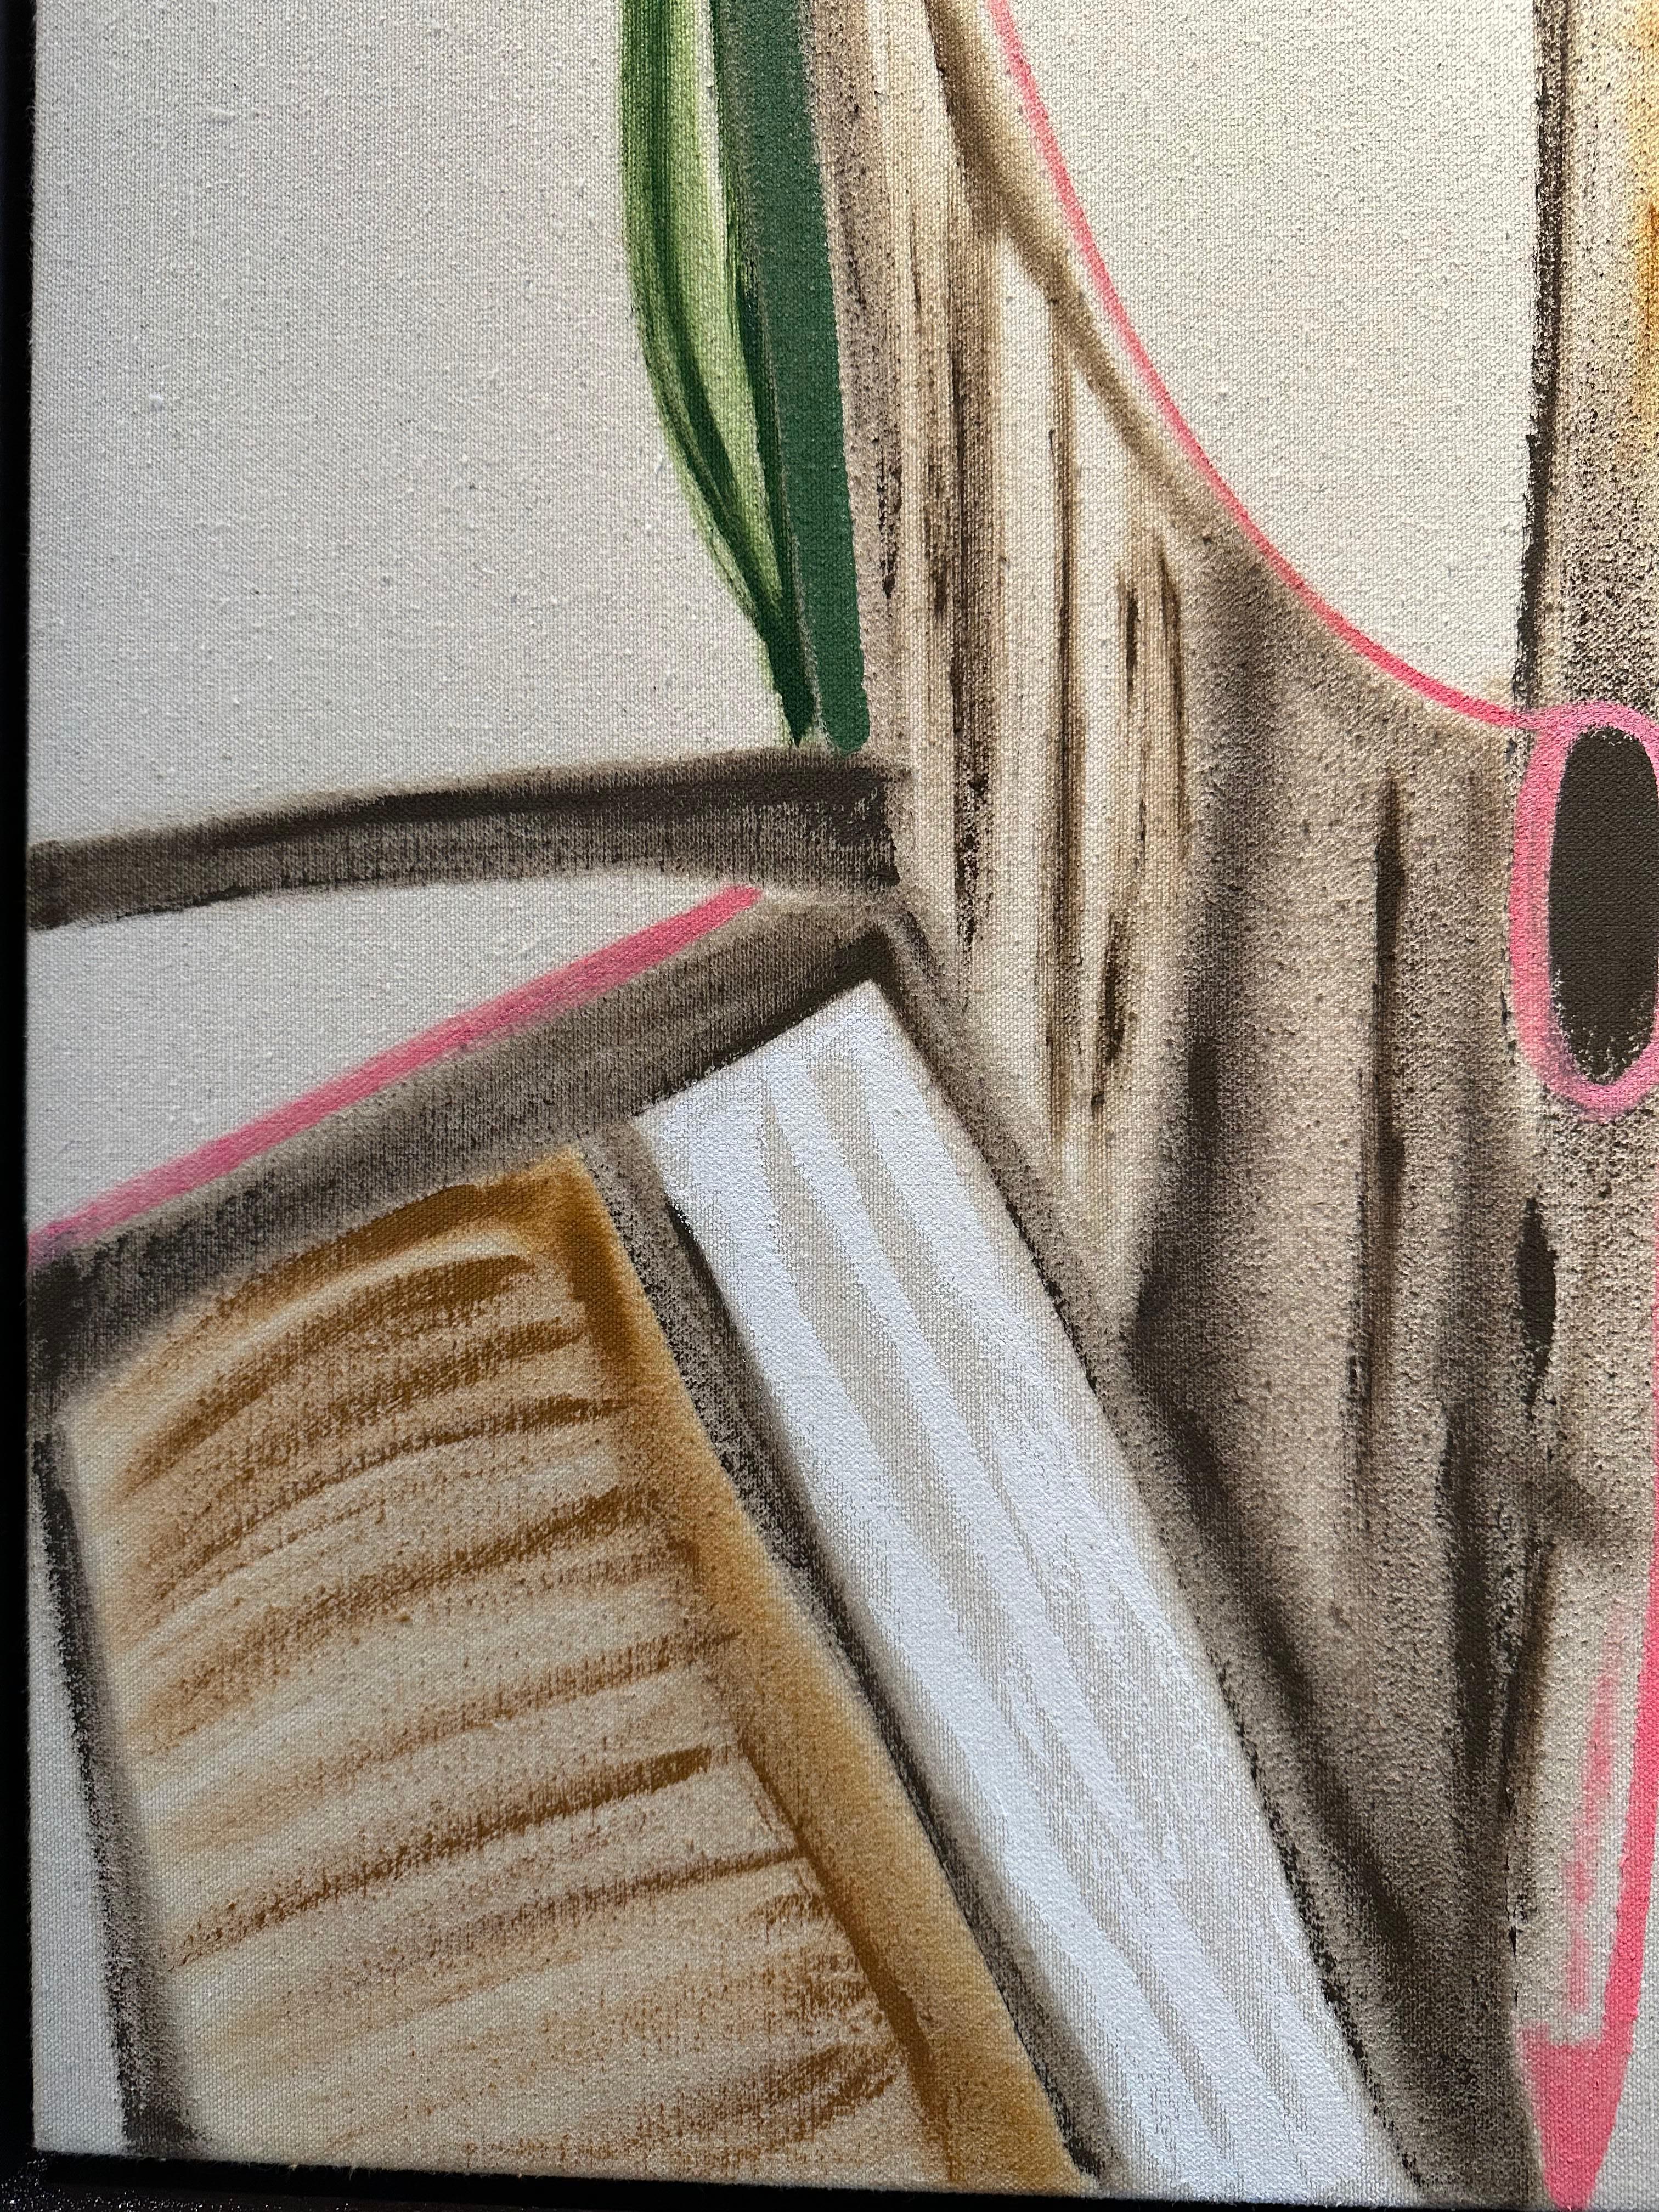 I decided to try a raw and unprimed canvas to enhance more of a natural element in a painting. The palette I chose was very neutral and earthy, but I brought in the pink for a little pop. Most of my paintings are not this simple, but I liked the